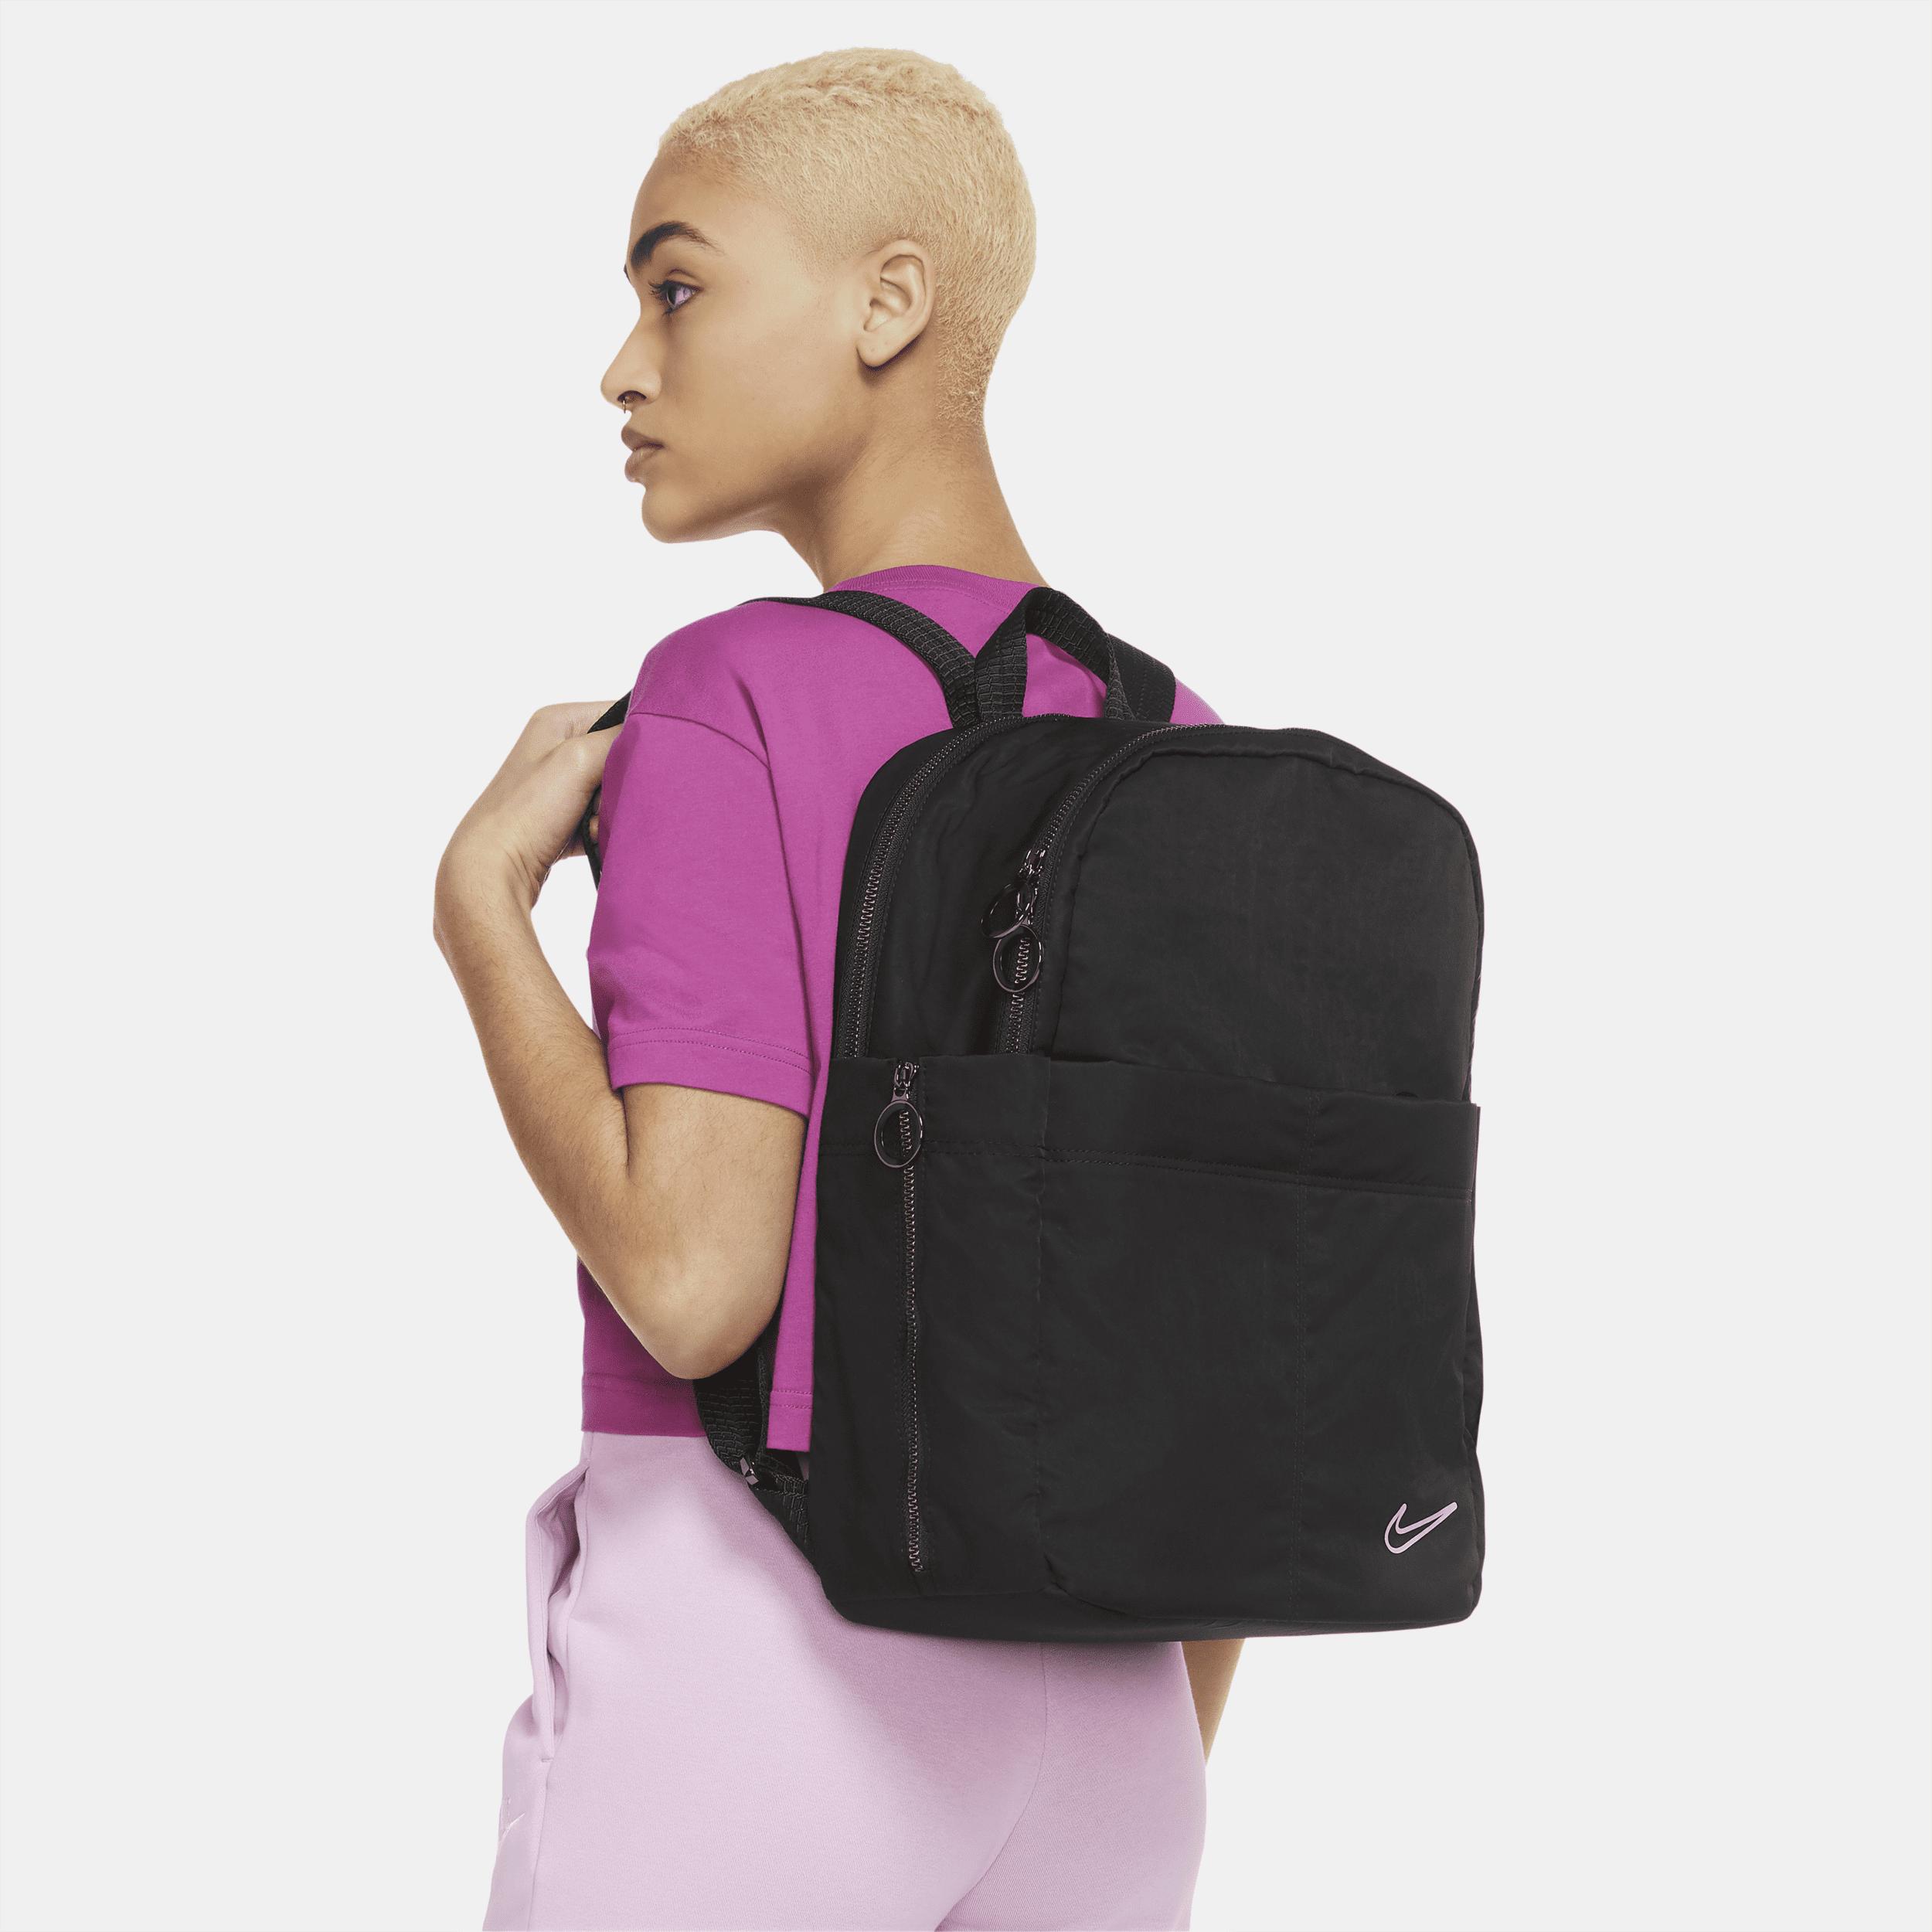 ONE LUXE BACKPACK CV0061 230